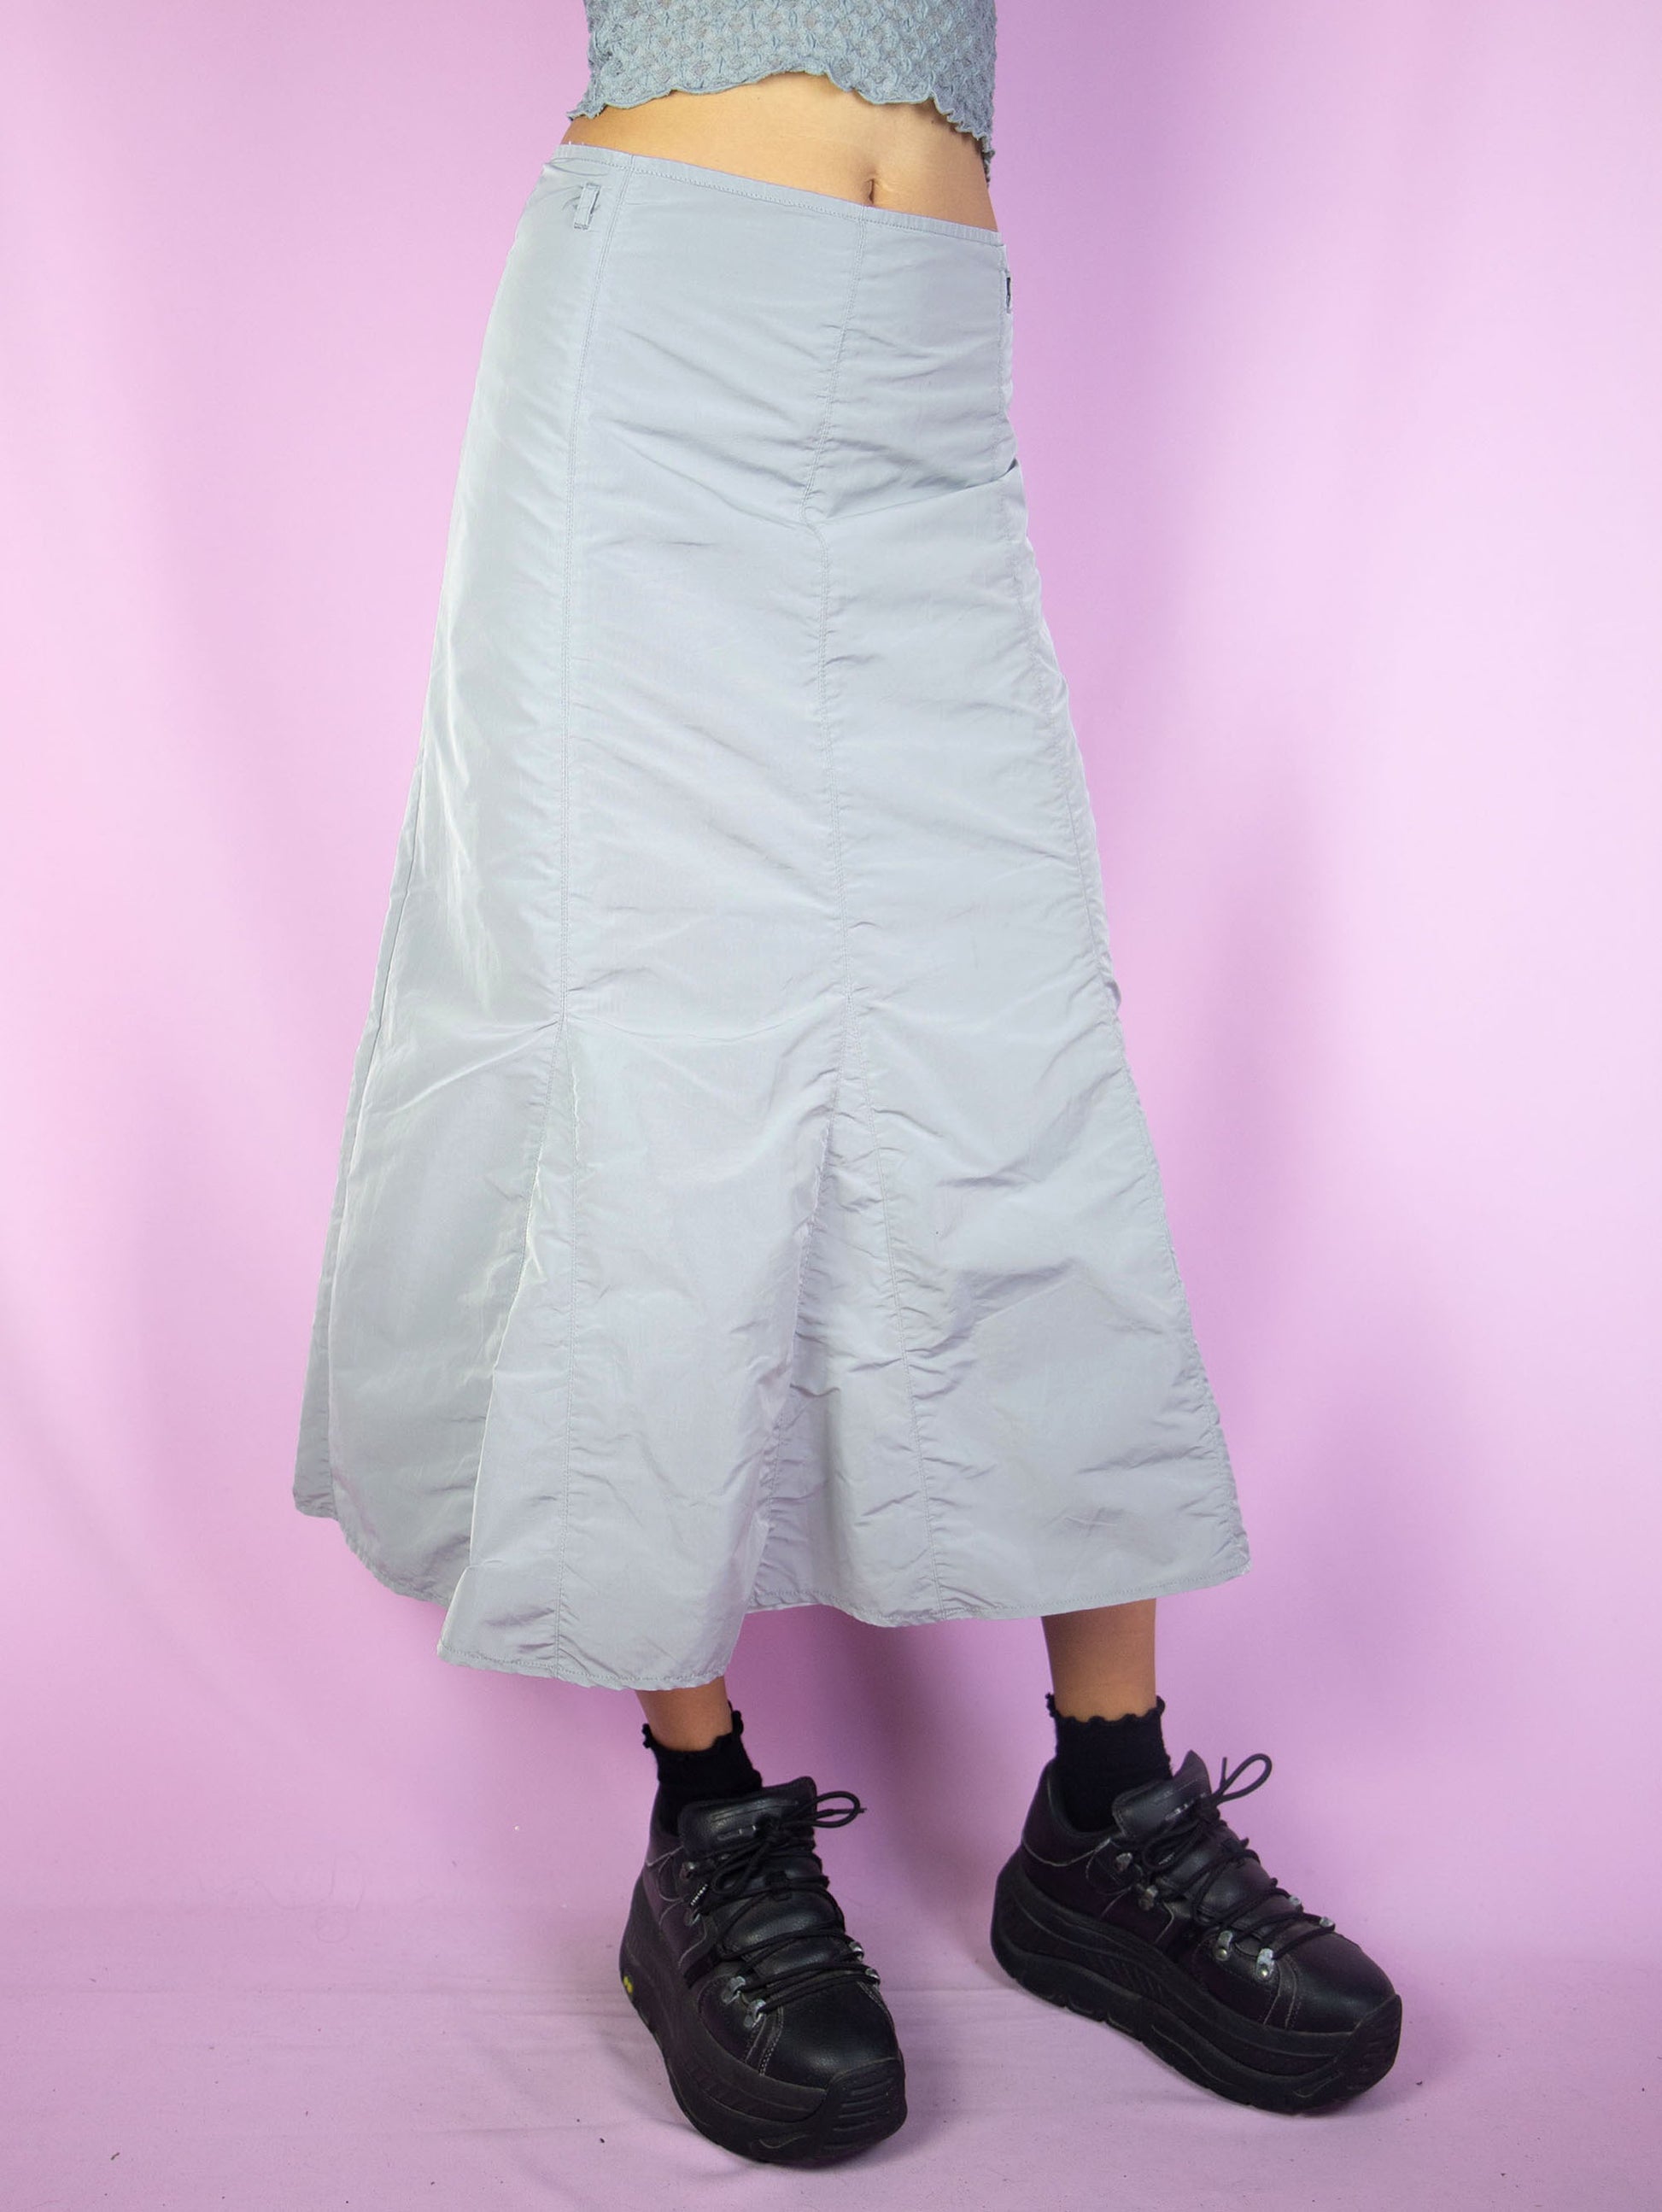 The Y2K Gray Parachute Midi Skirt is a vintage light gray paneled flared skirt with back zipper closure. Cyber goth grunge 2000s gorpcore subversive maxi skirt.